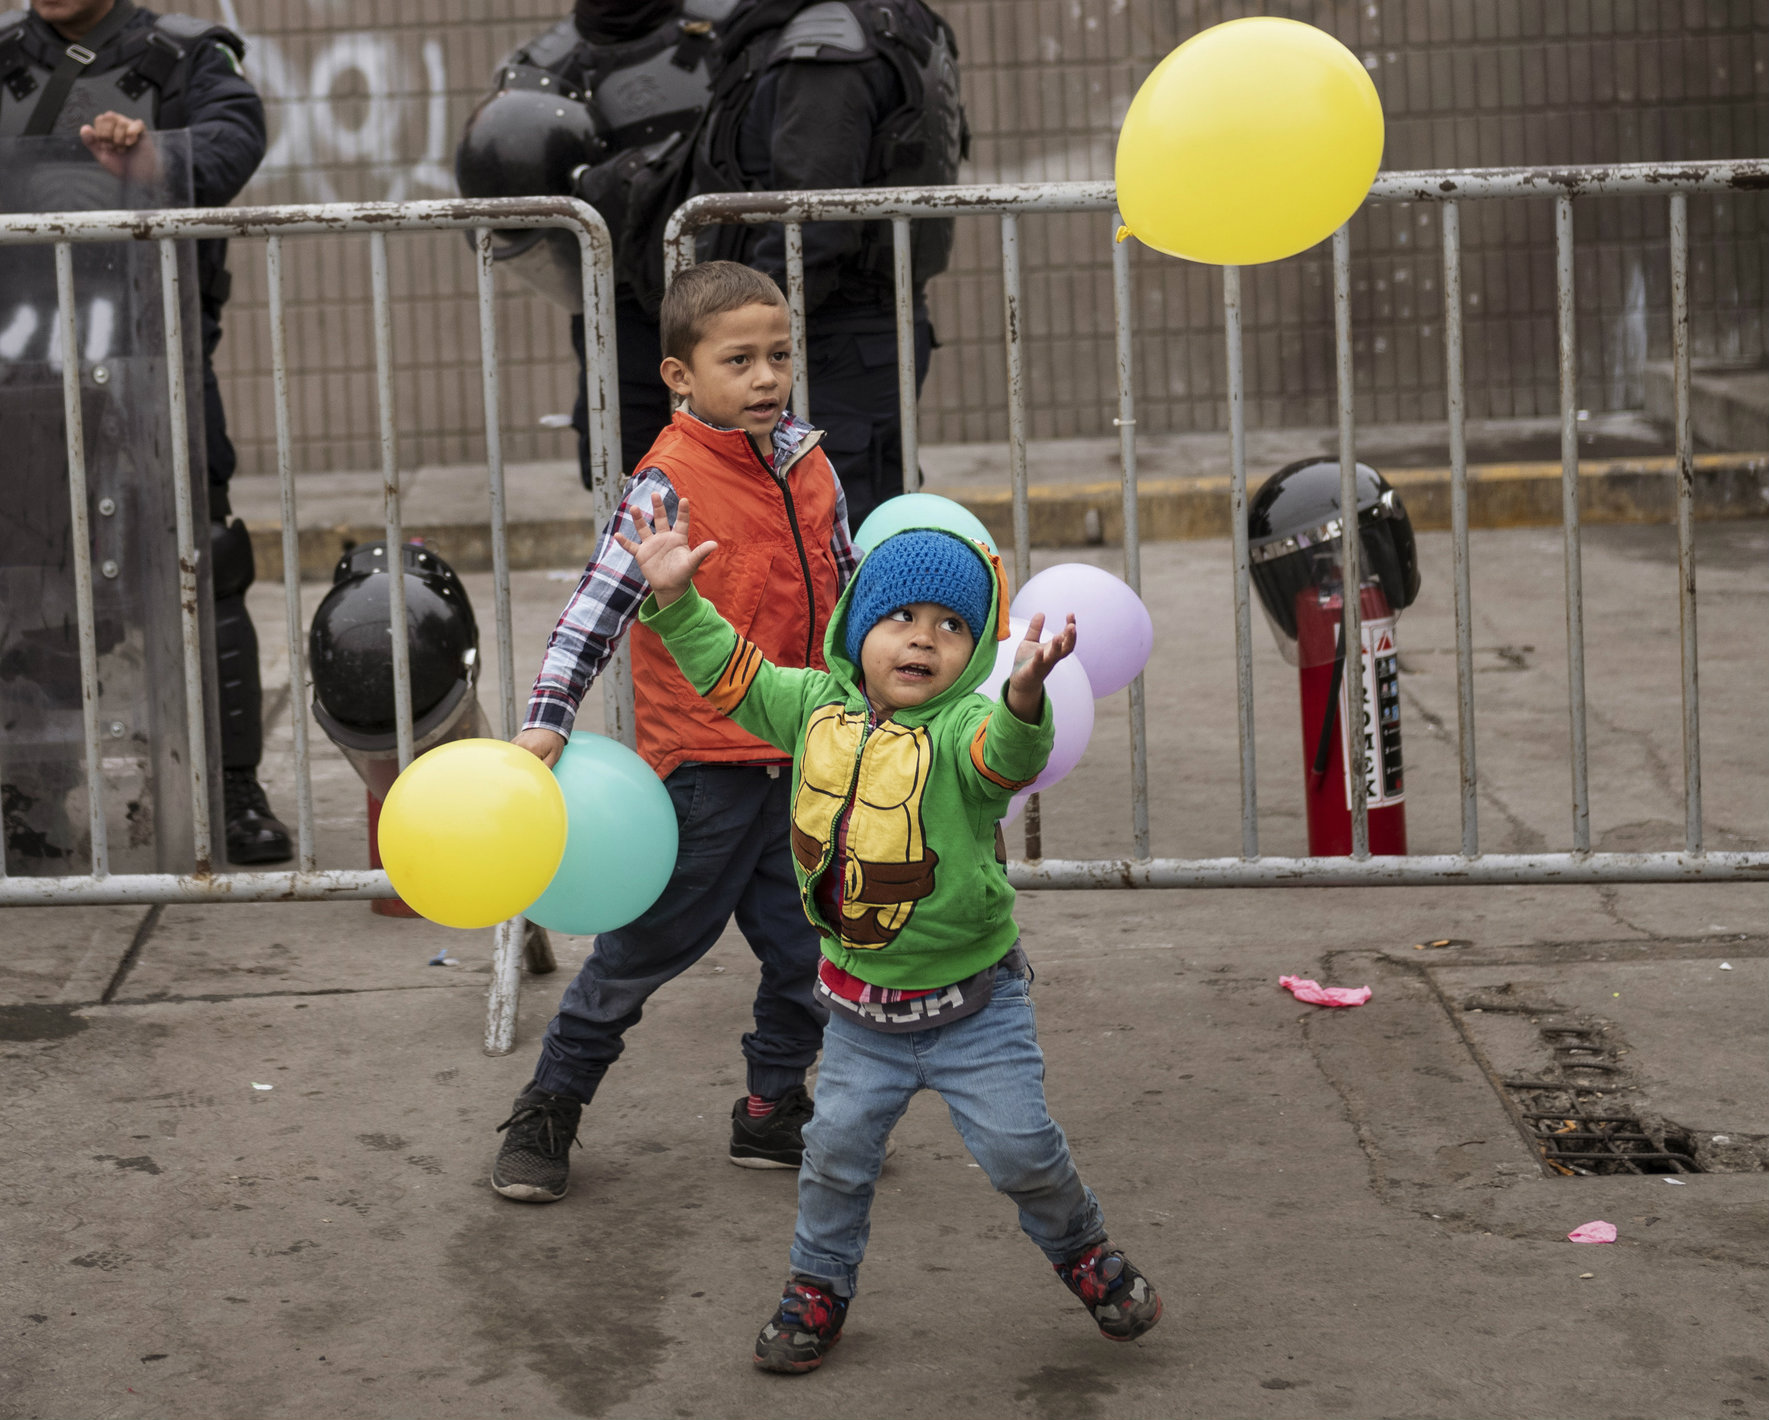 Children play with balloons outside an empty warehouse used as a shelter set up for migrants in downtown Tijuana, Mexico.